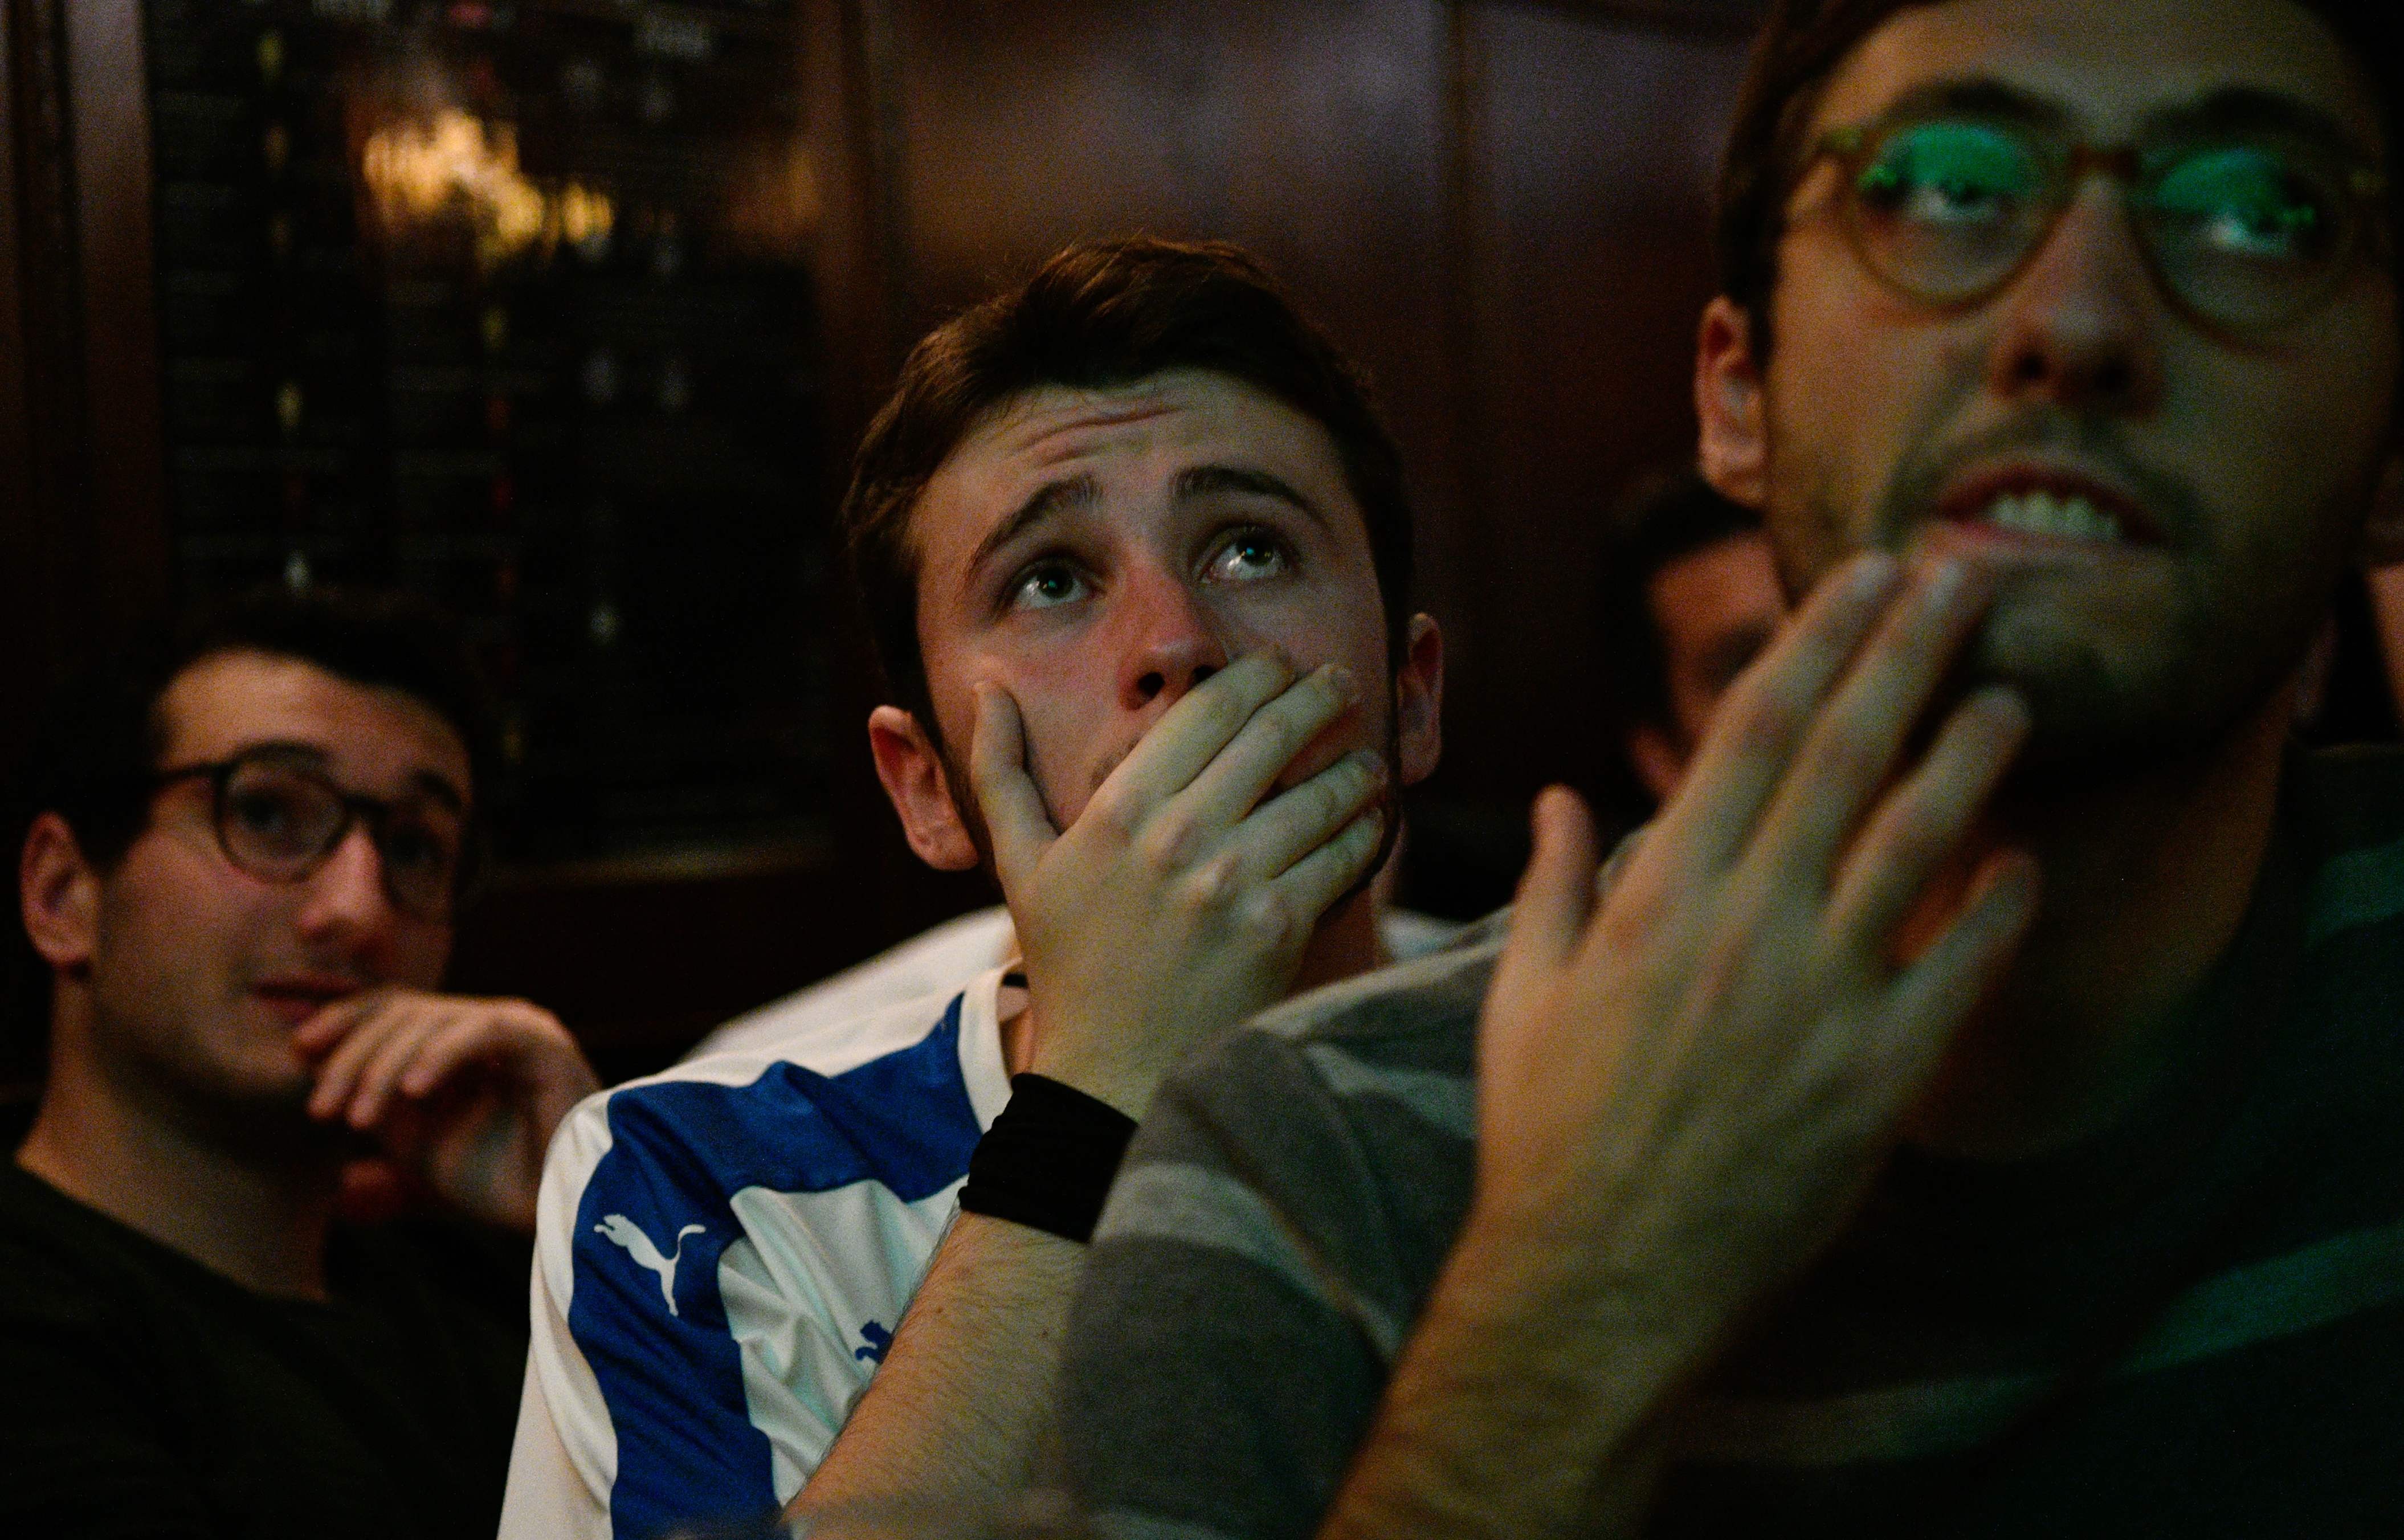 Italy supporters reacted in disbelief after the 0-0 World Cup 2018 play-off draw with Sweden condemned them to the World Cup exit. Photo: AFP